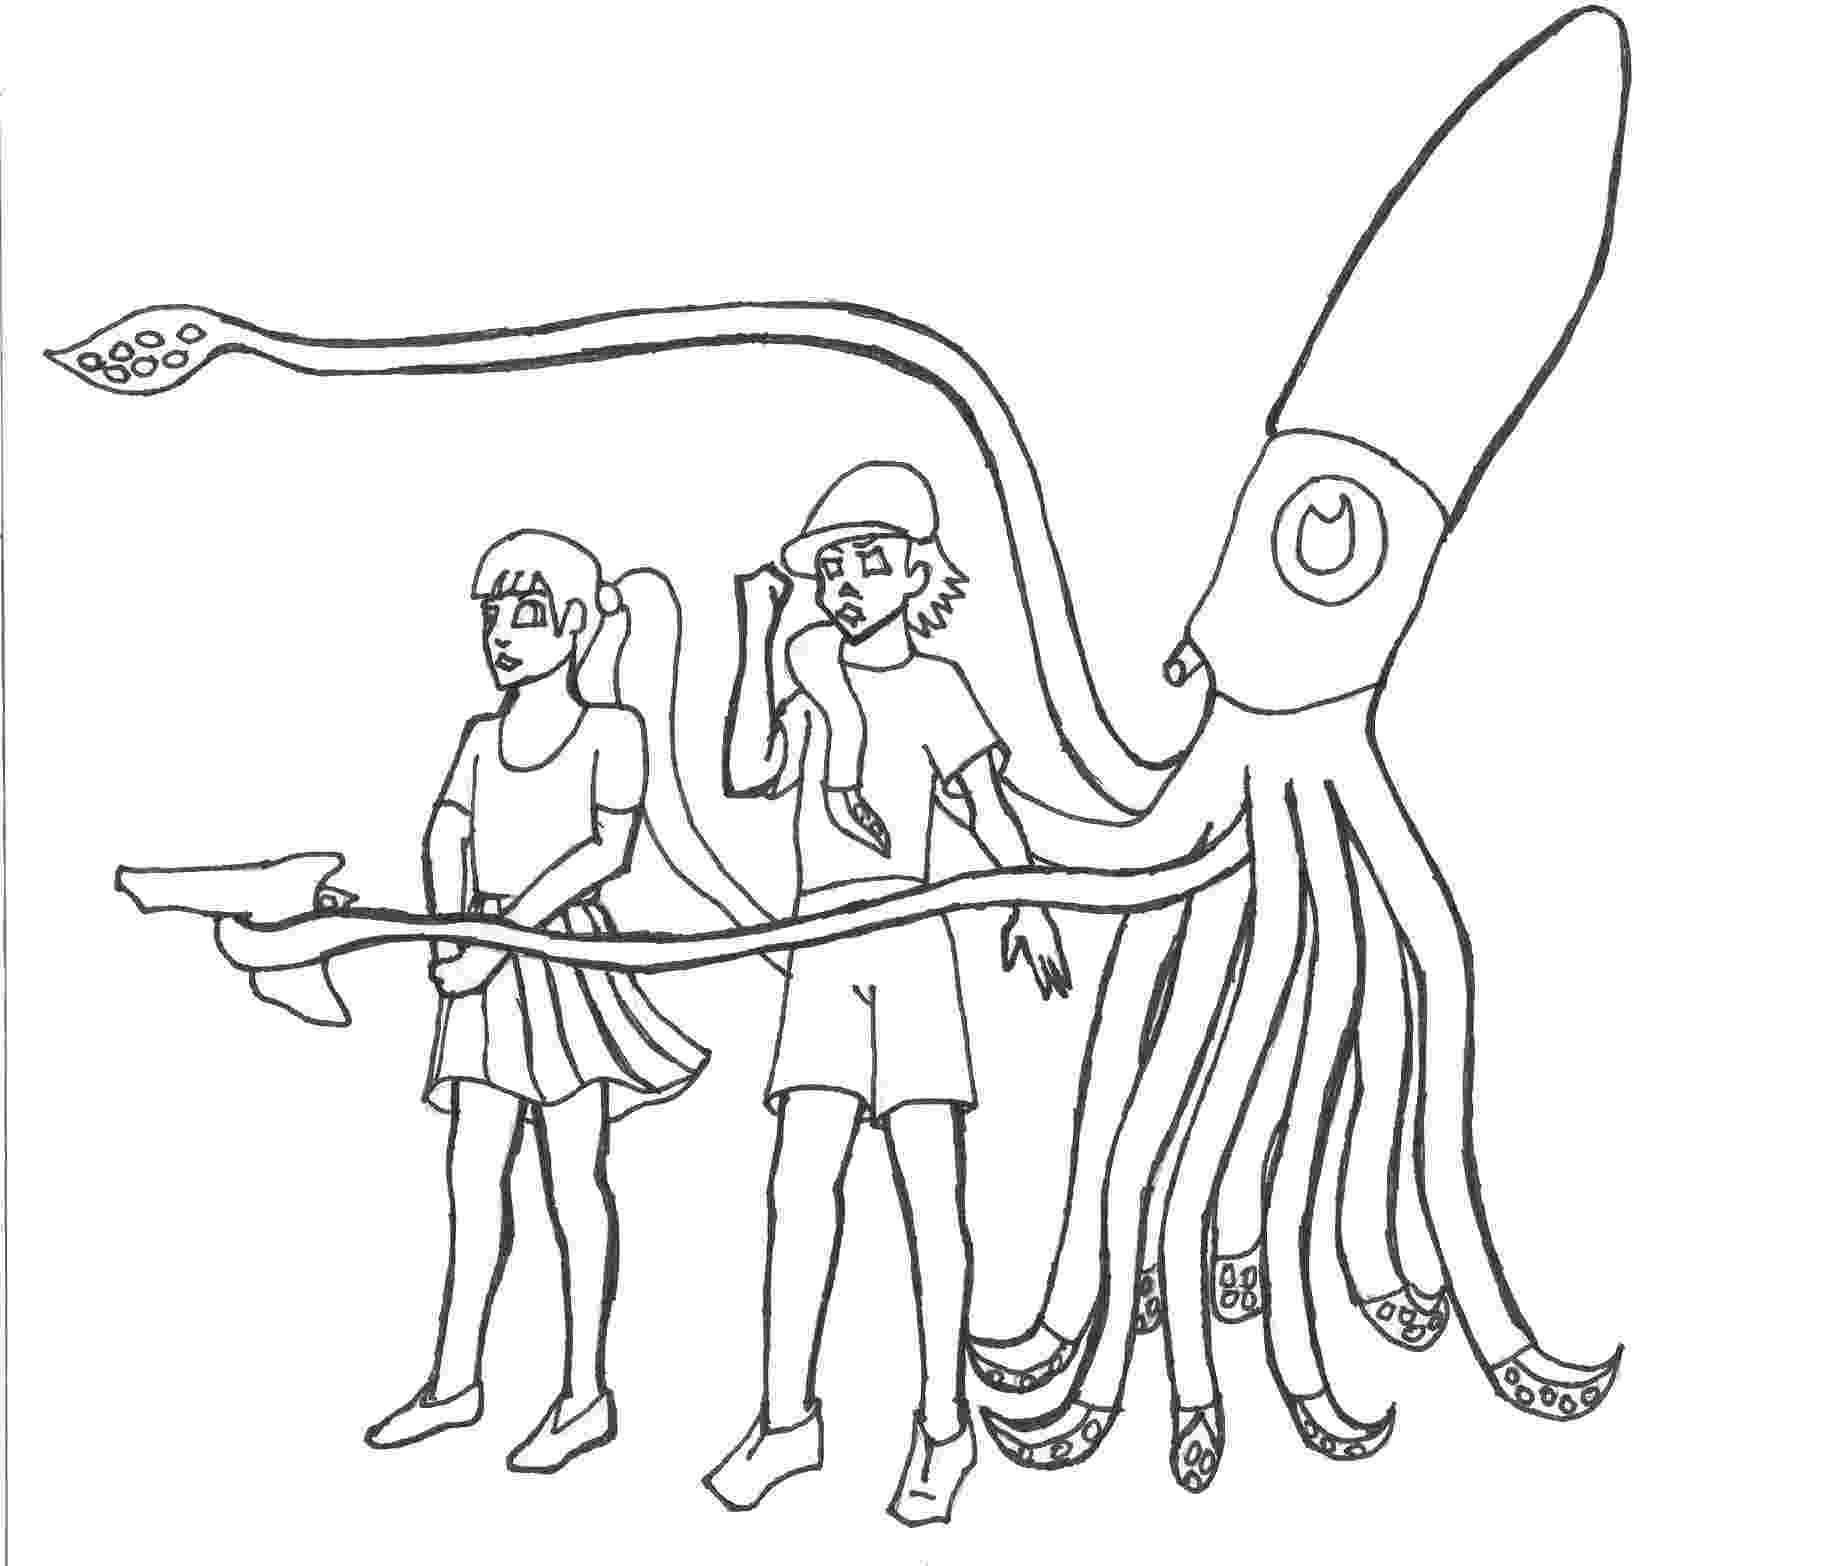 squid coloring page squid coloring pages getcoloringpagescom squid coloring page 